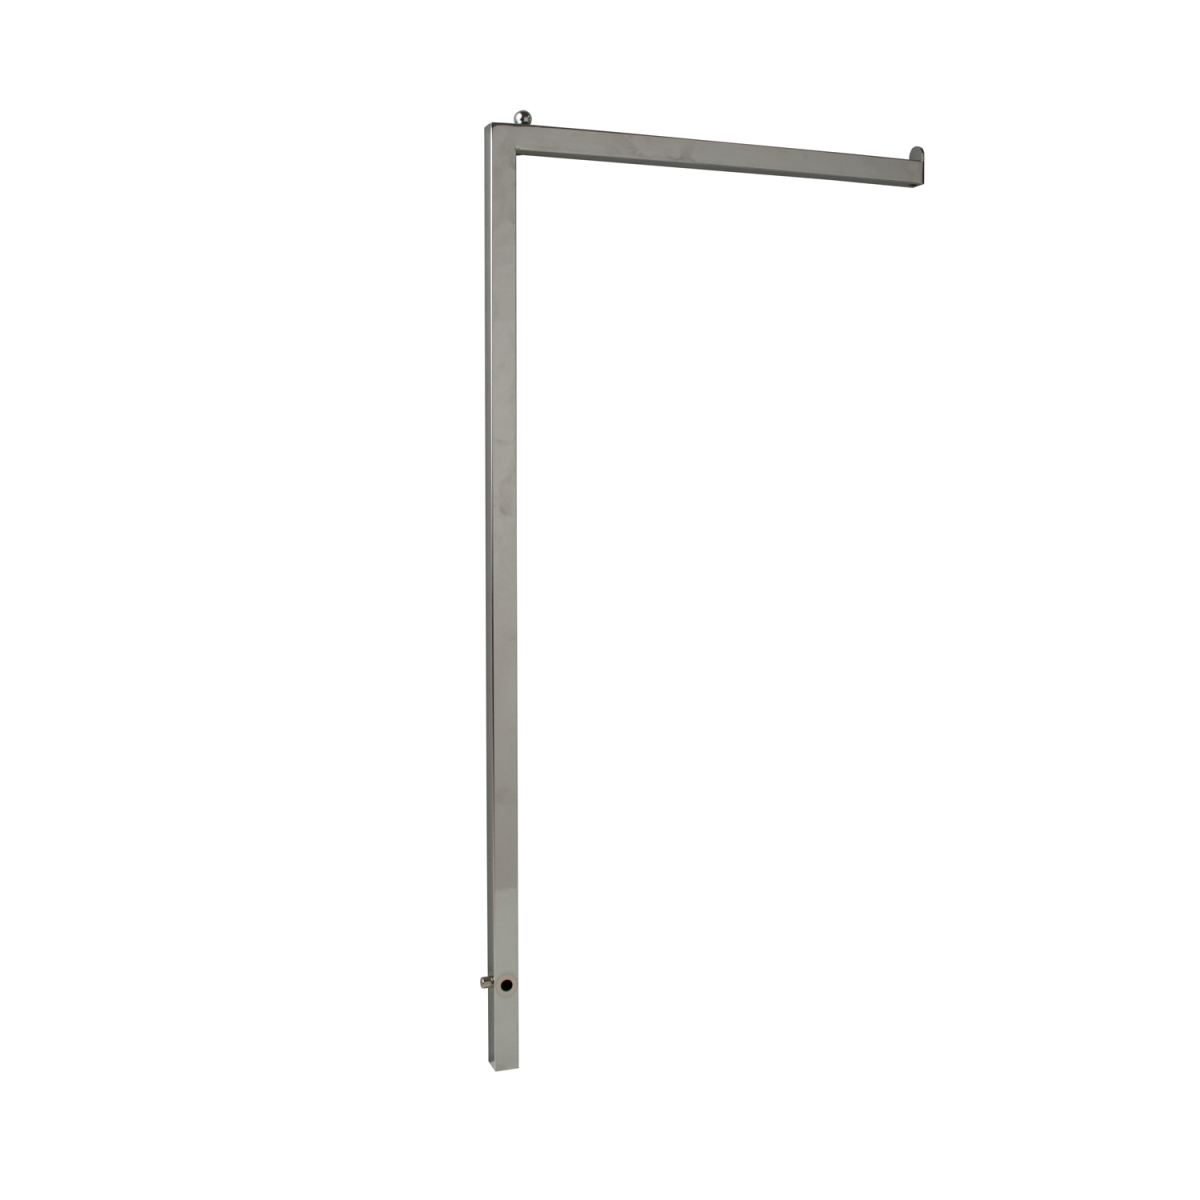 Arm10 16 In. Square Tubing Straight Arm - Chrome